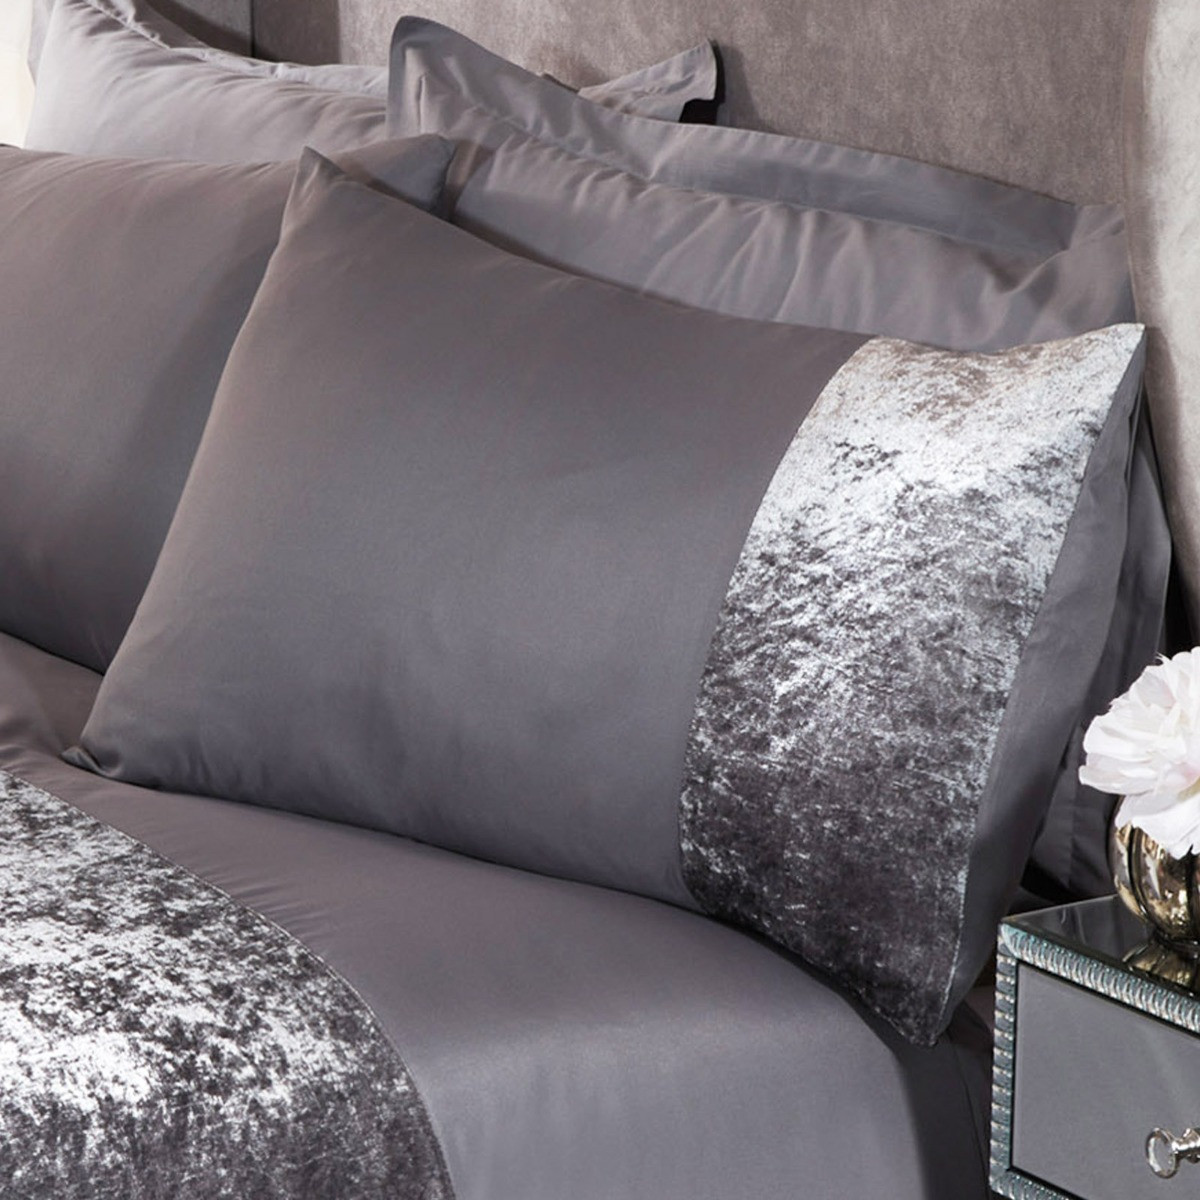 Sienna Crushed Velvet Band 4 Pack of Pillowcases - Silver Grey>